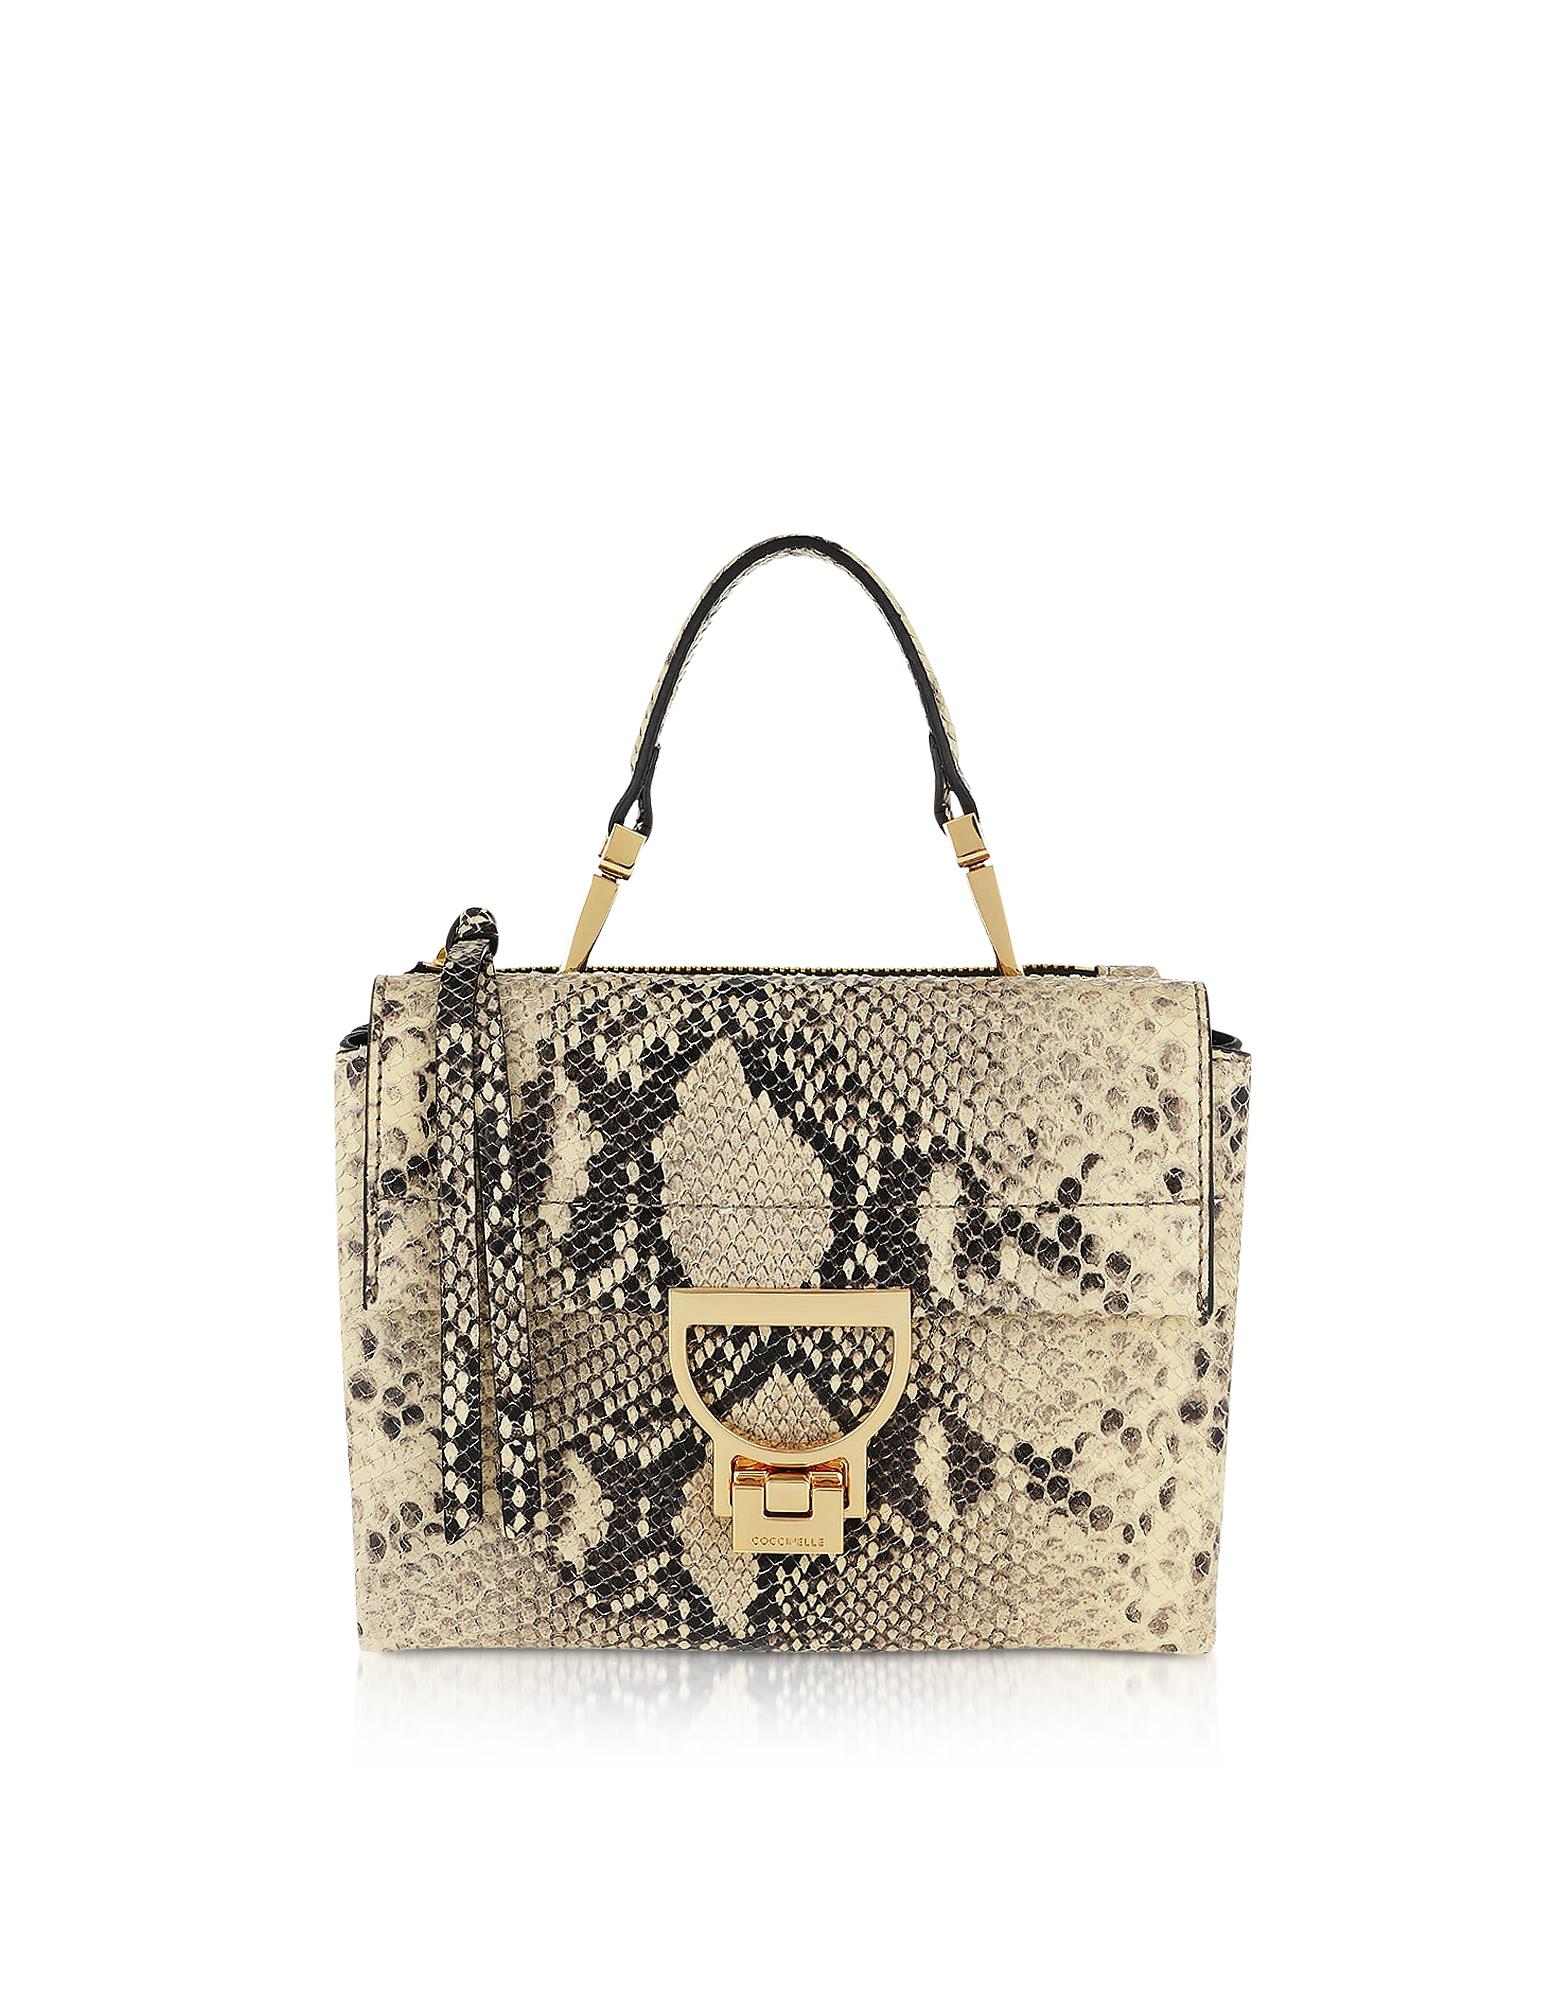 Coccinelle Arlettis Mini Python Embossed Leather Shoulder Bag in Stone ...